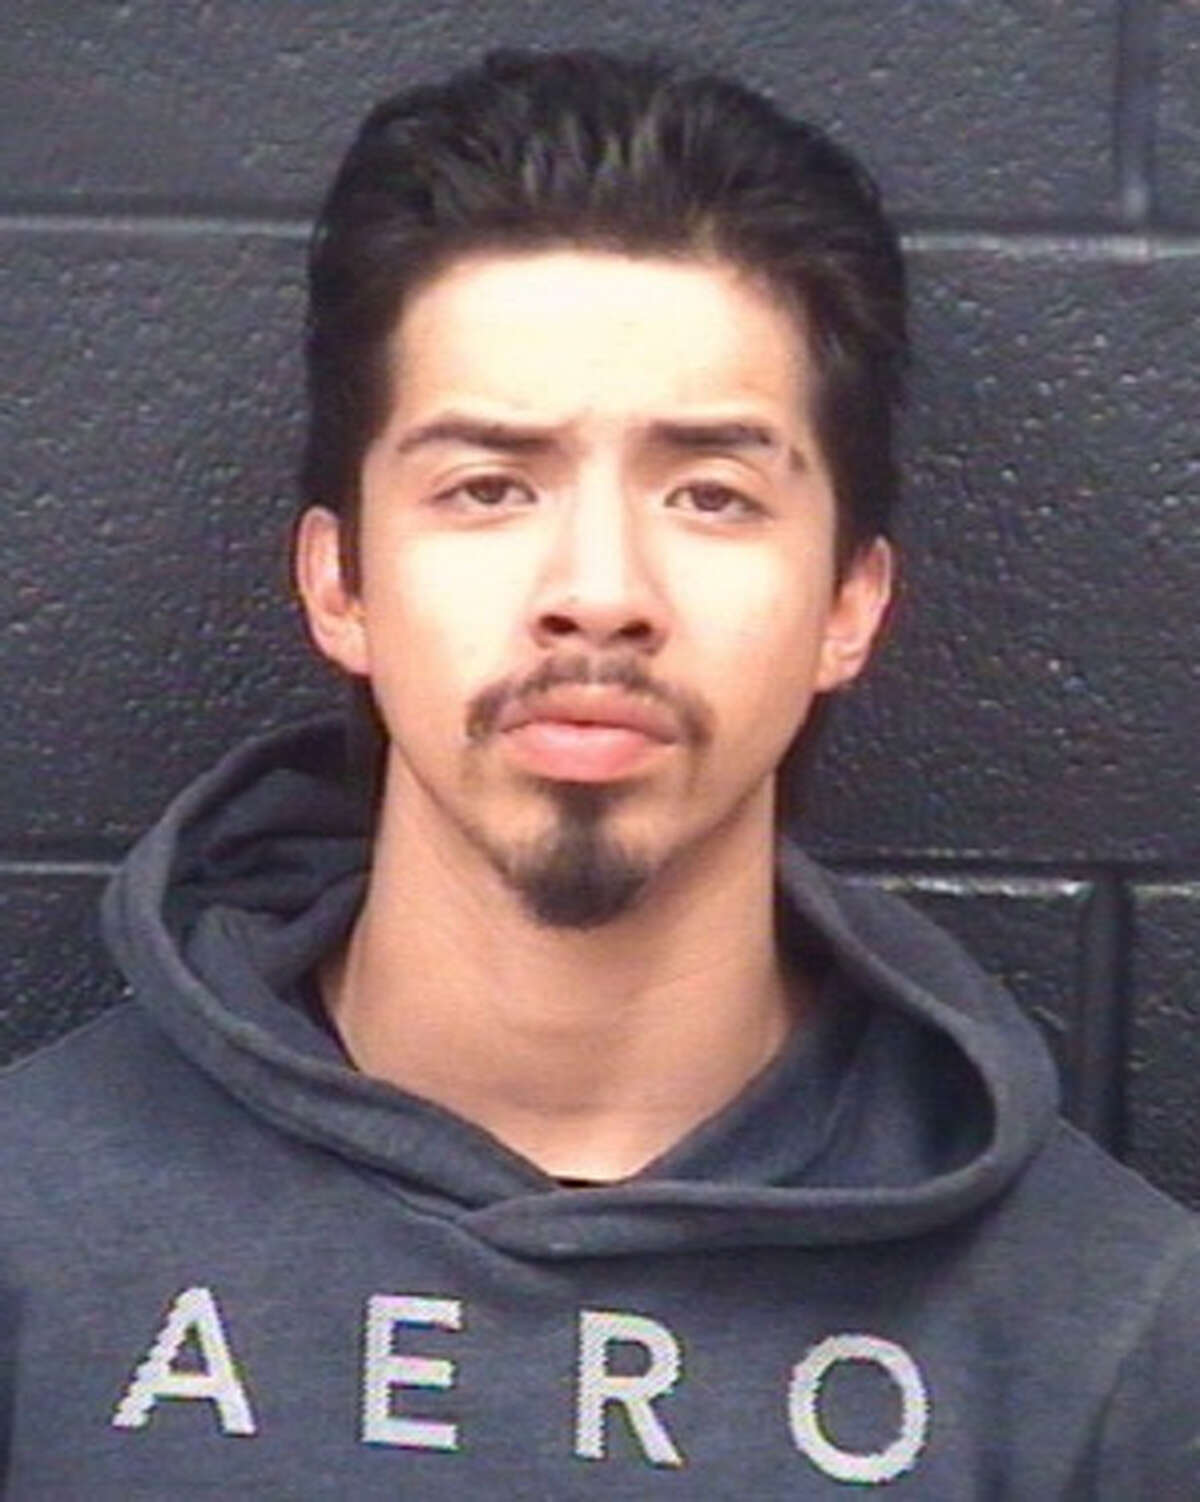 Jorge Alcantar, 18, was charged with two counts of aggravated robbery with a knife.